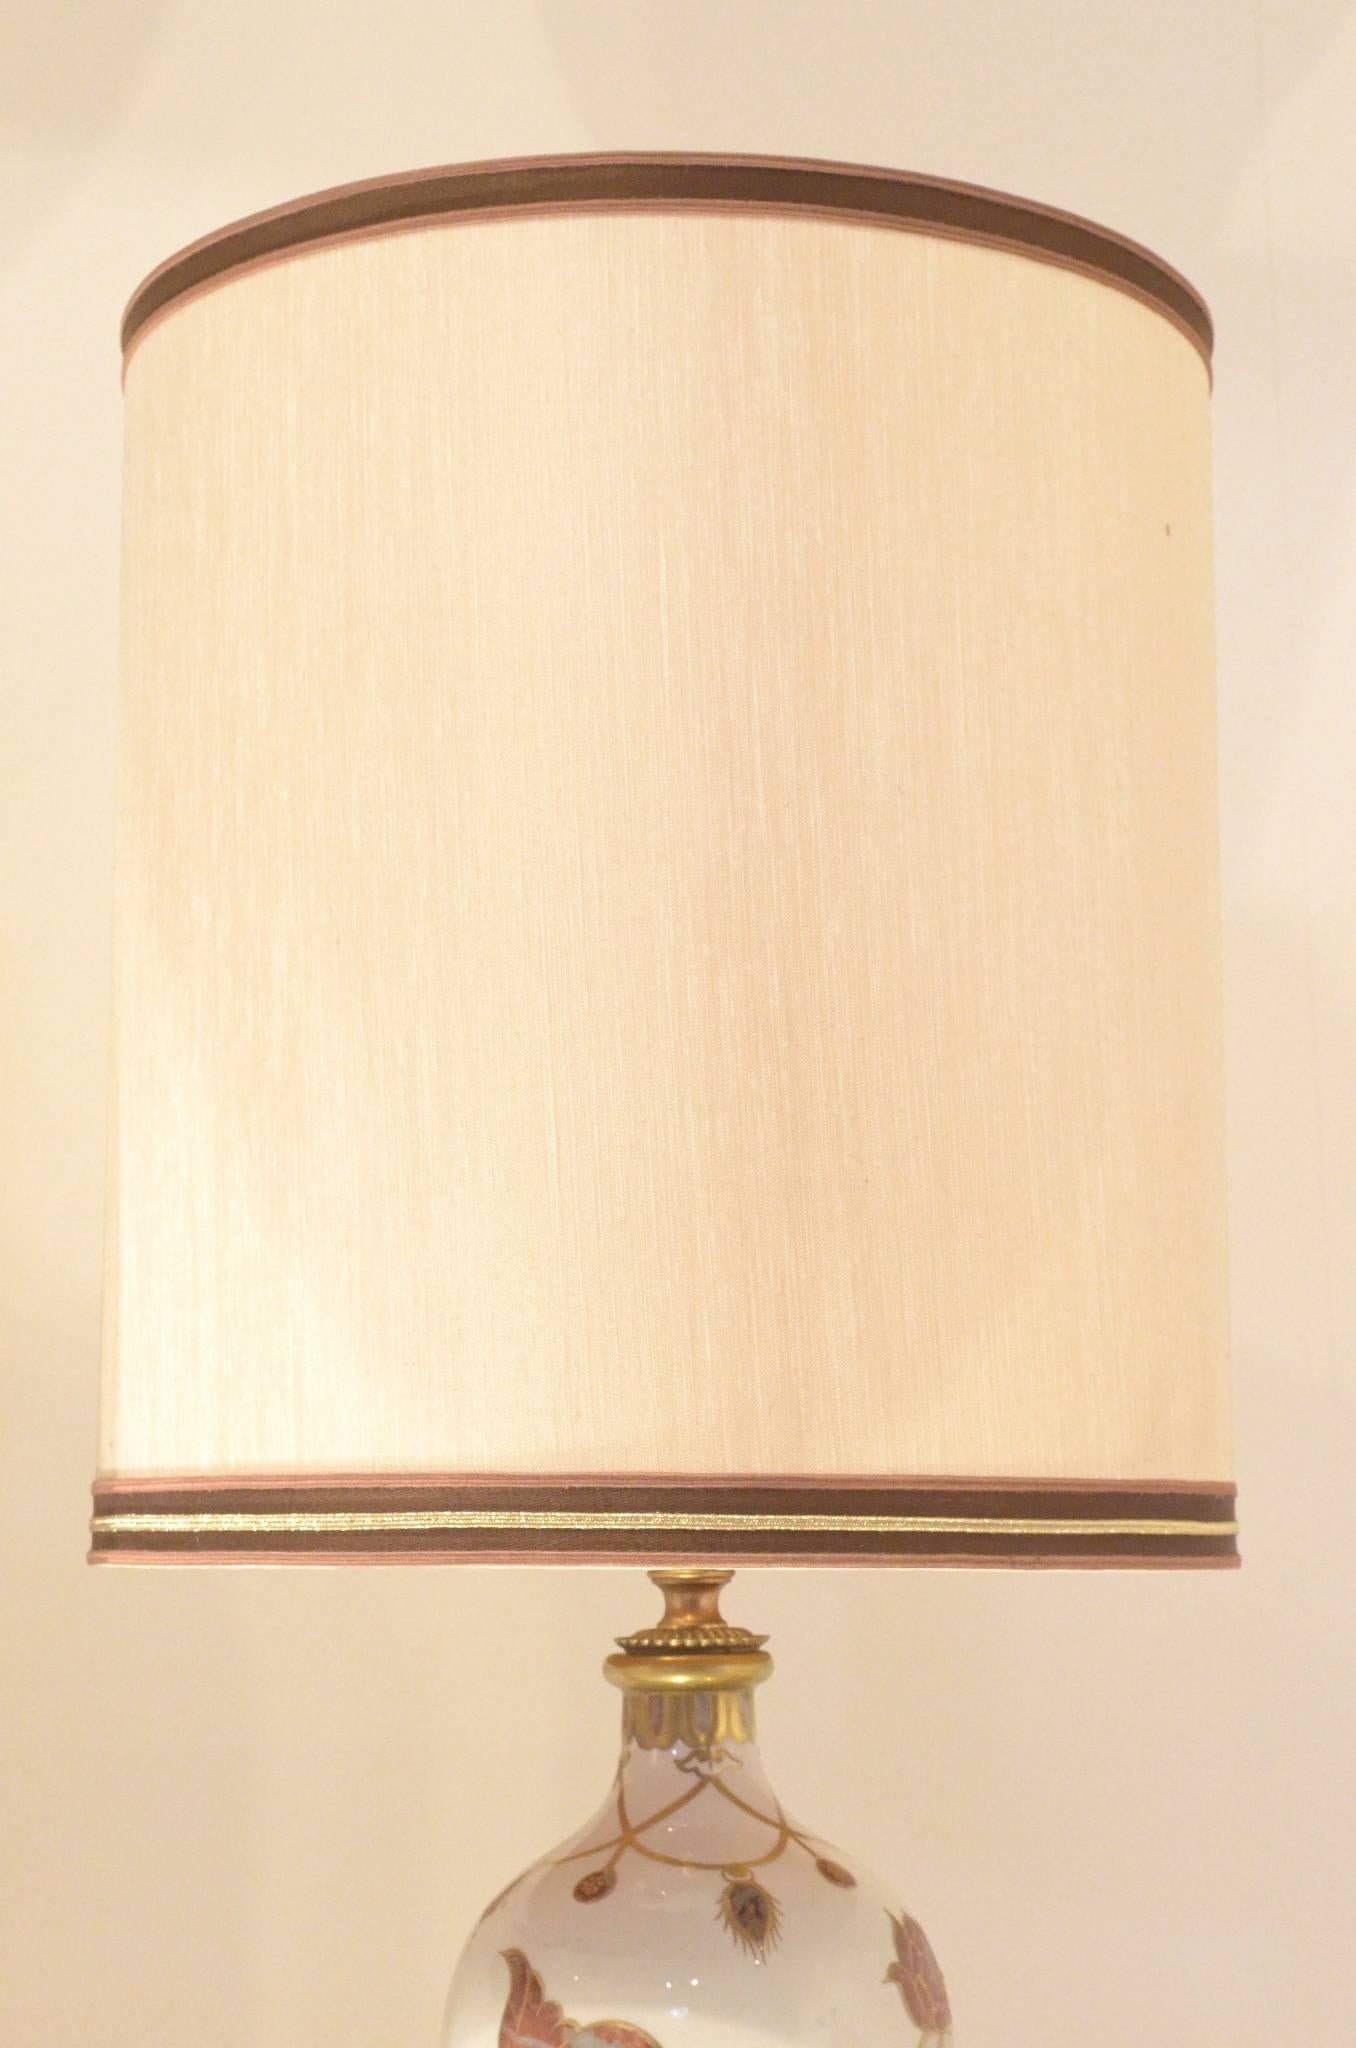 Pair of French Table Lamps in Bronze and Porcelain by Manufacture De Sèvres (Mitte des 20. Jahrhunderts) im Angebot